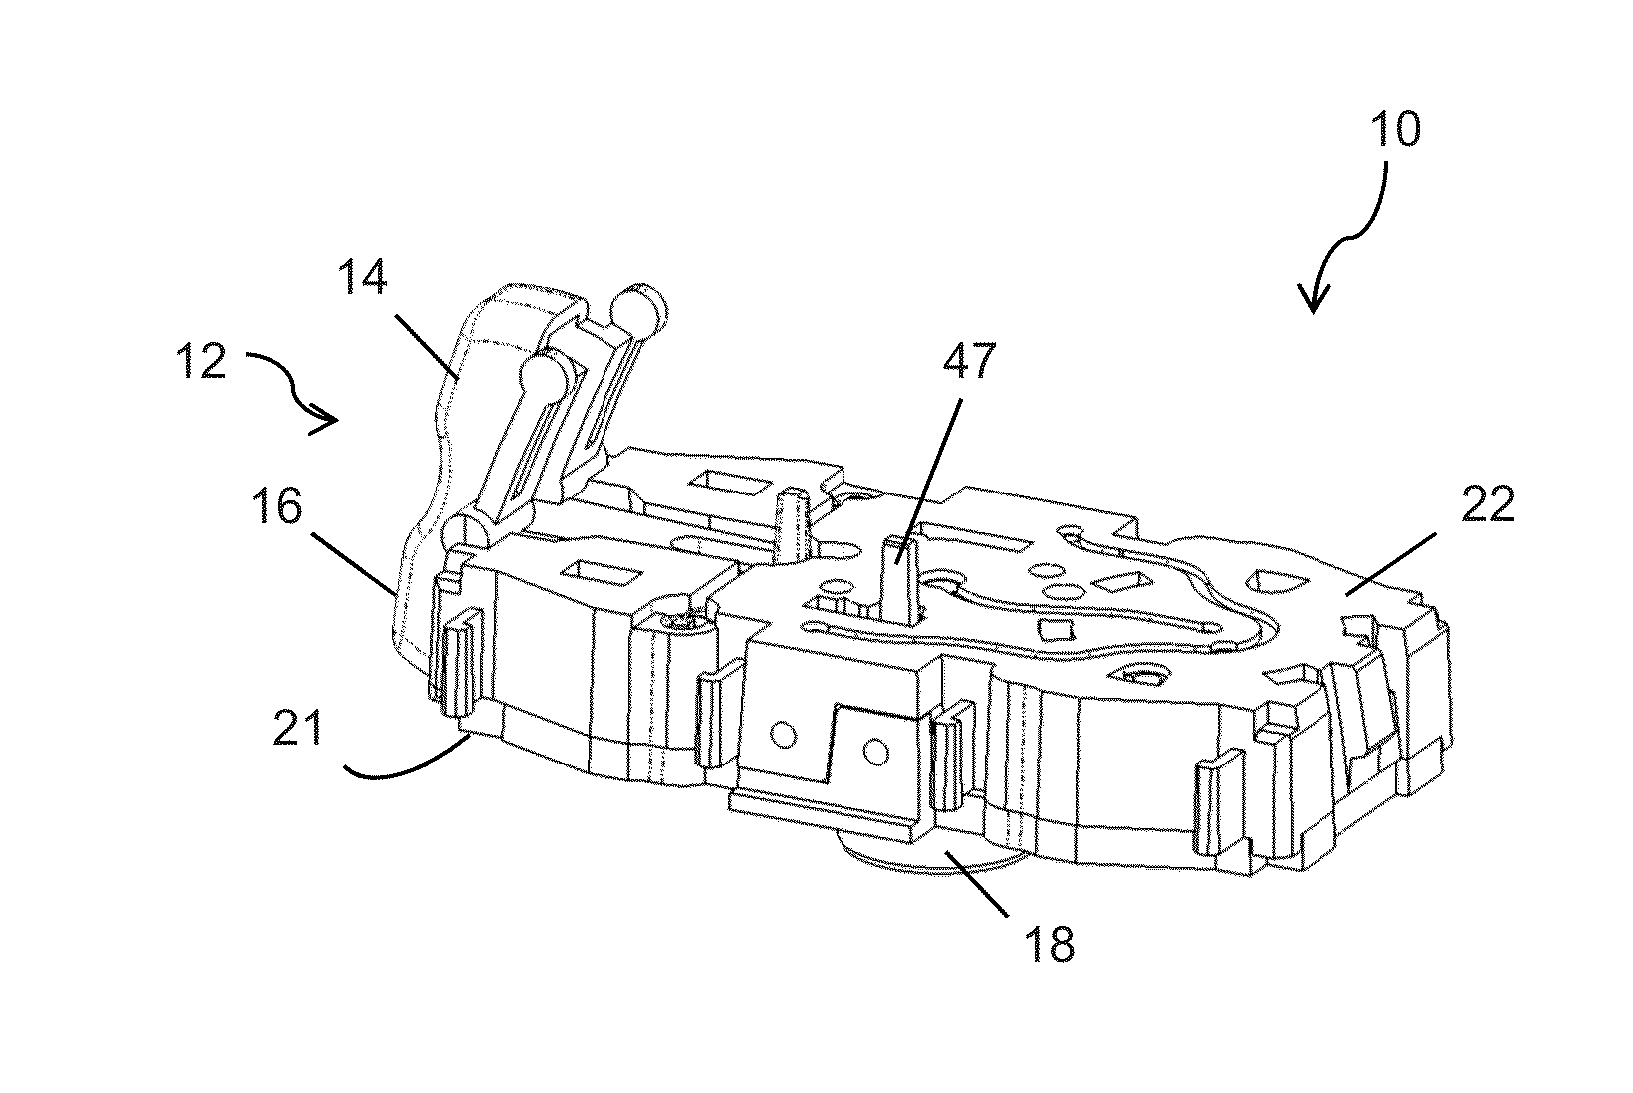 Fluidic Interface Module for a Fuel Cell System